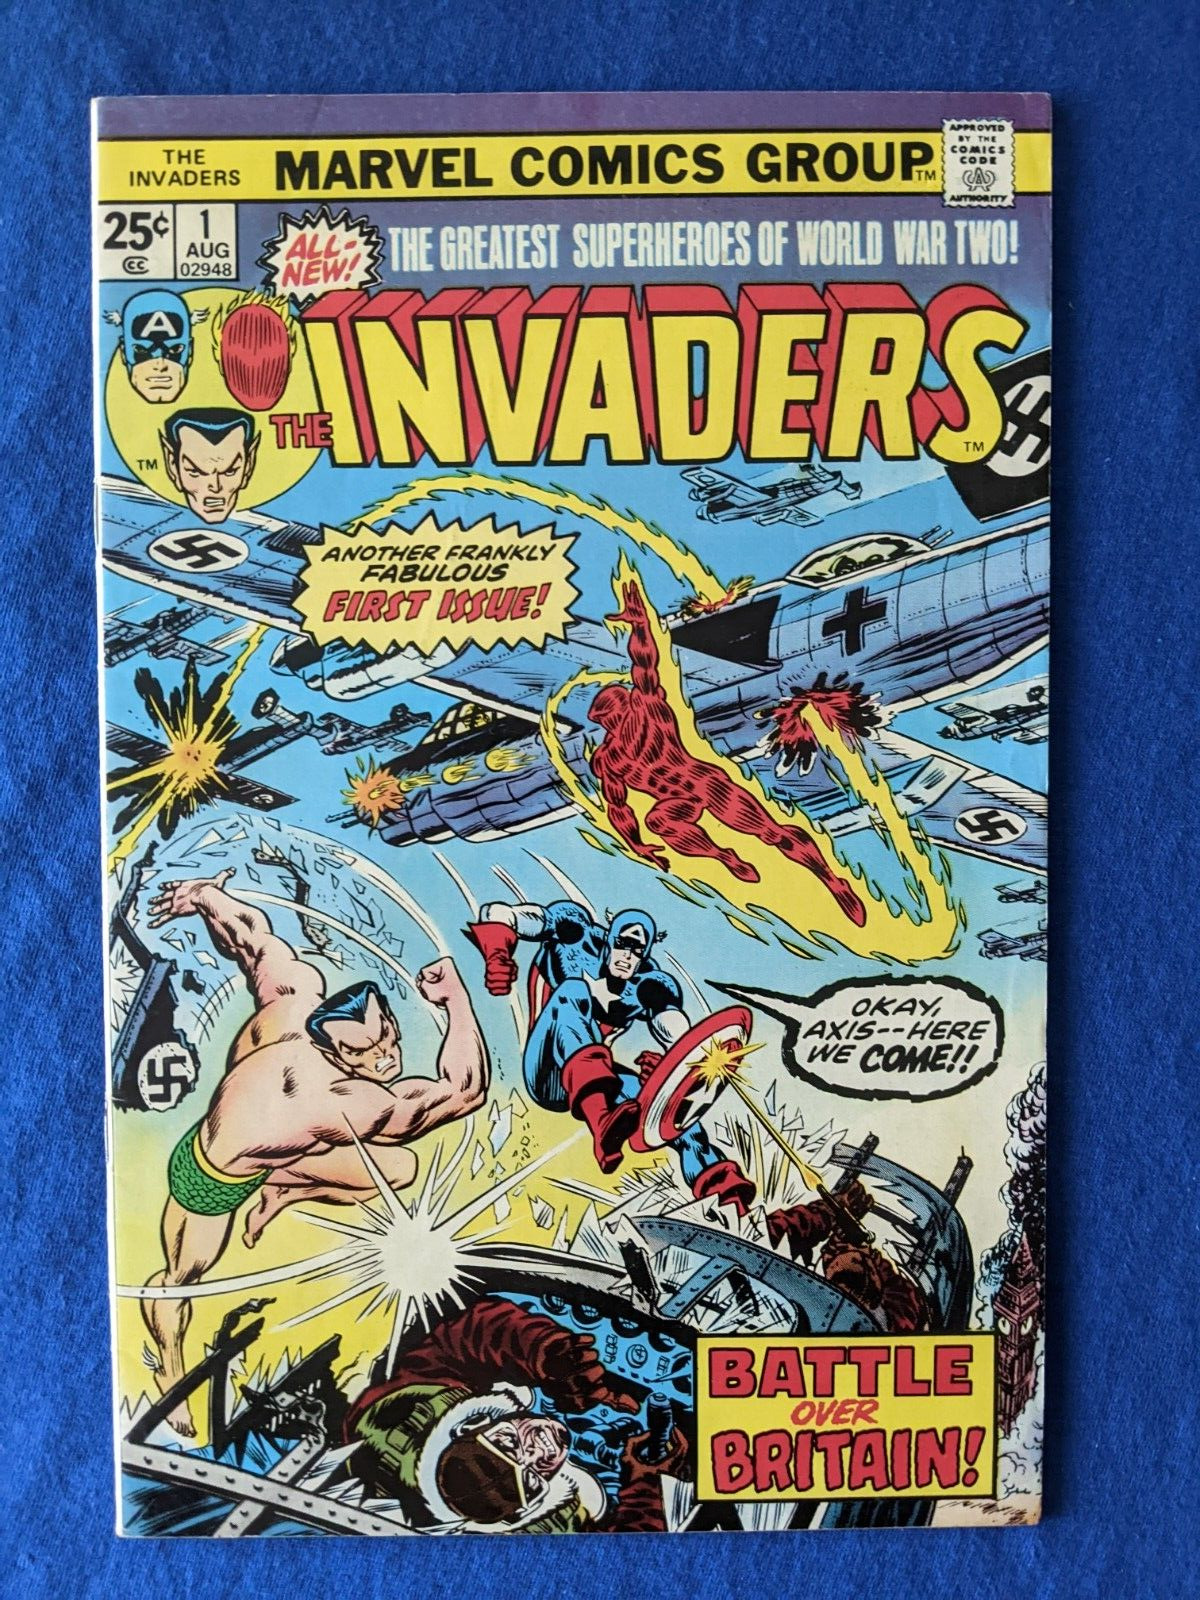 THE INVADERS #1 (Aug 1975) Marvel Bronze age classic, key first issue. Nice copy